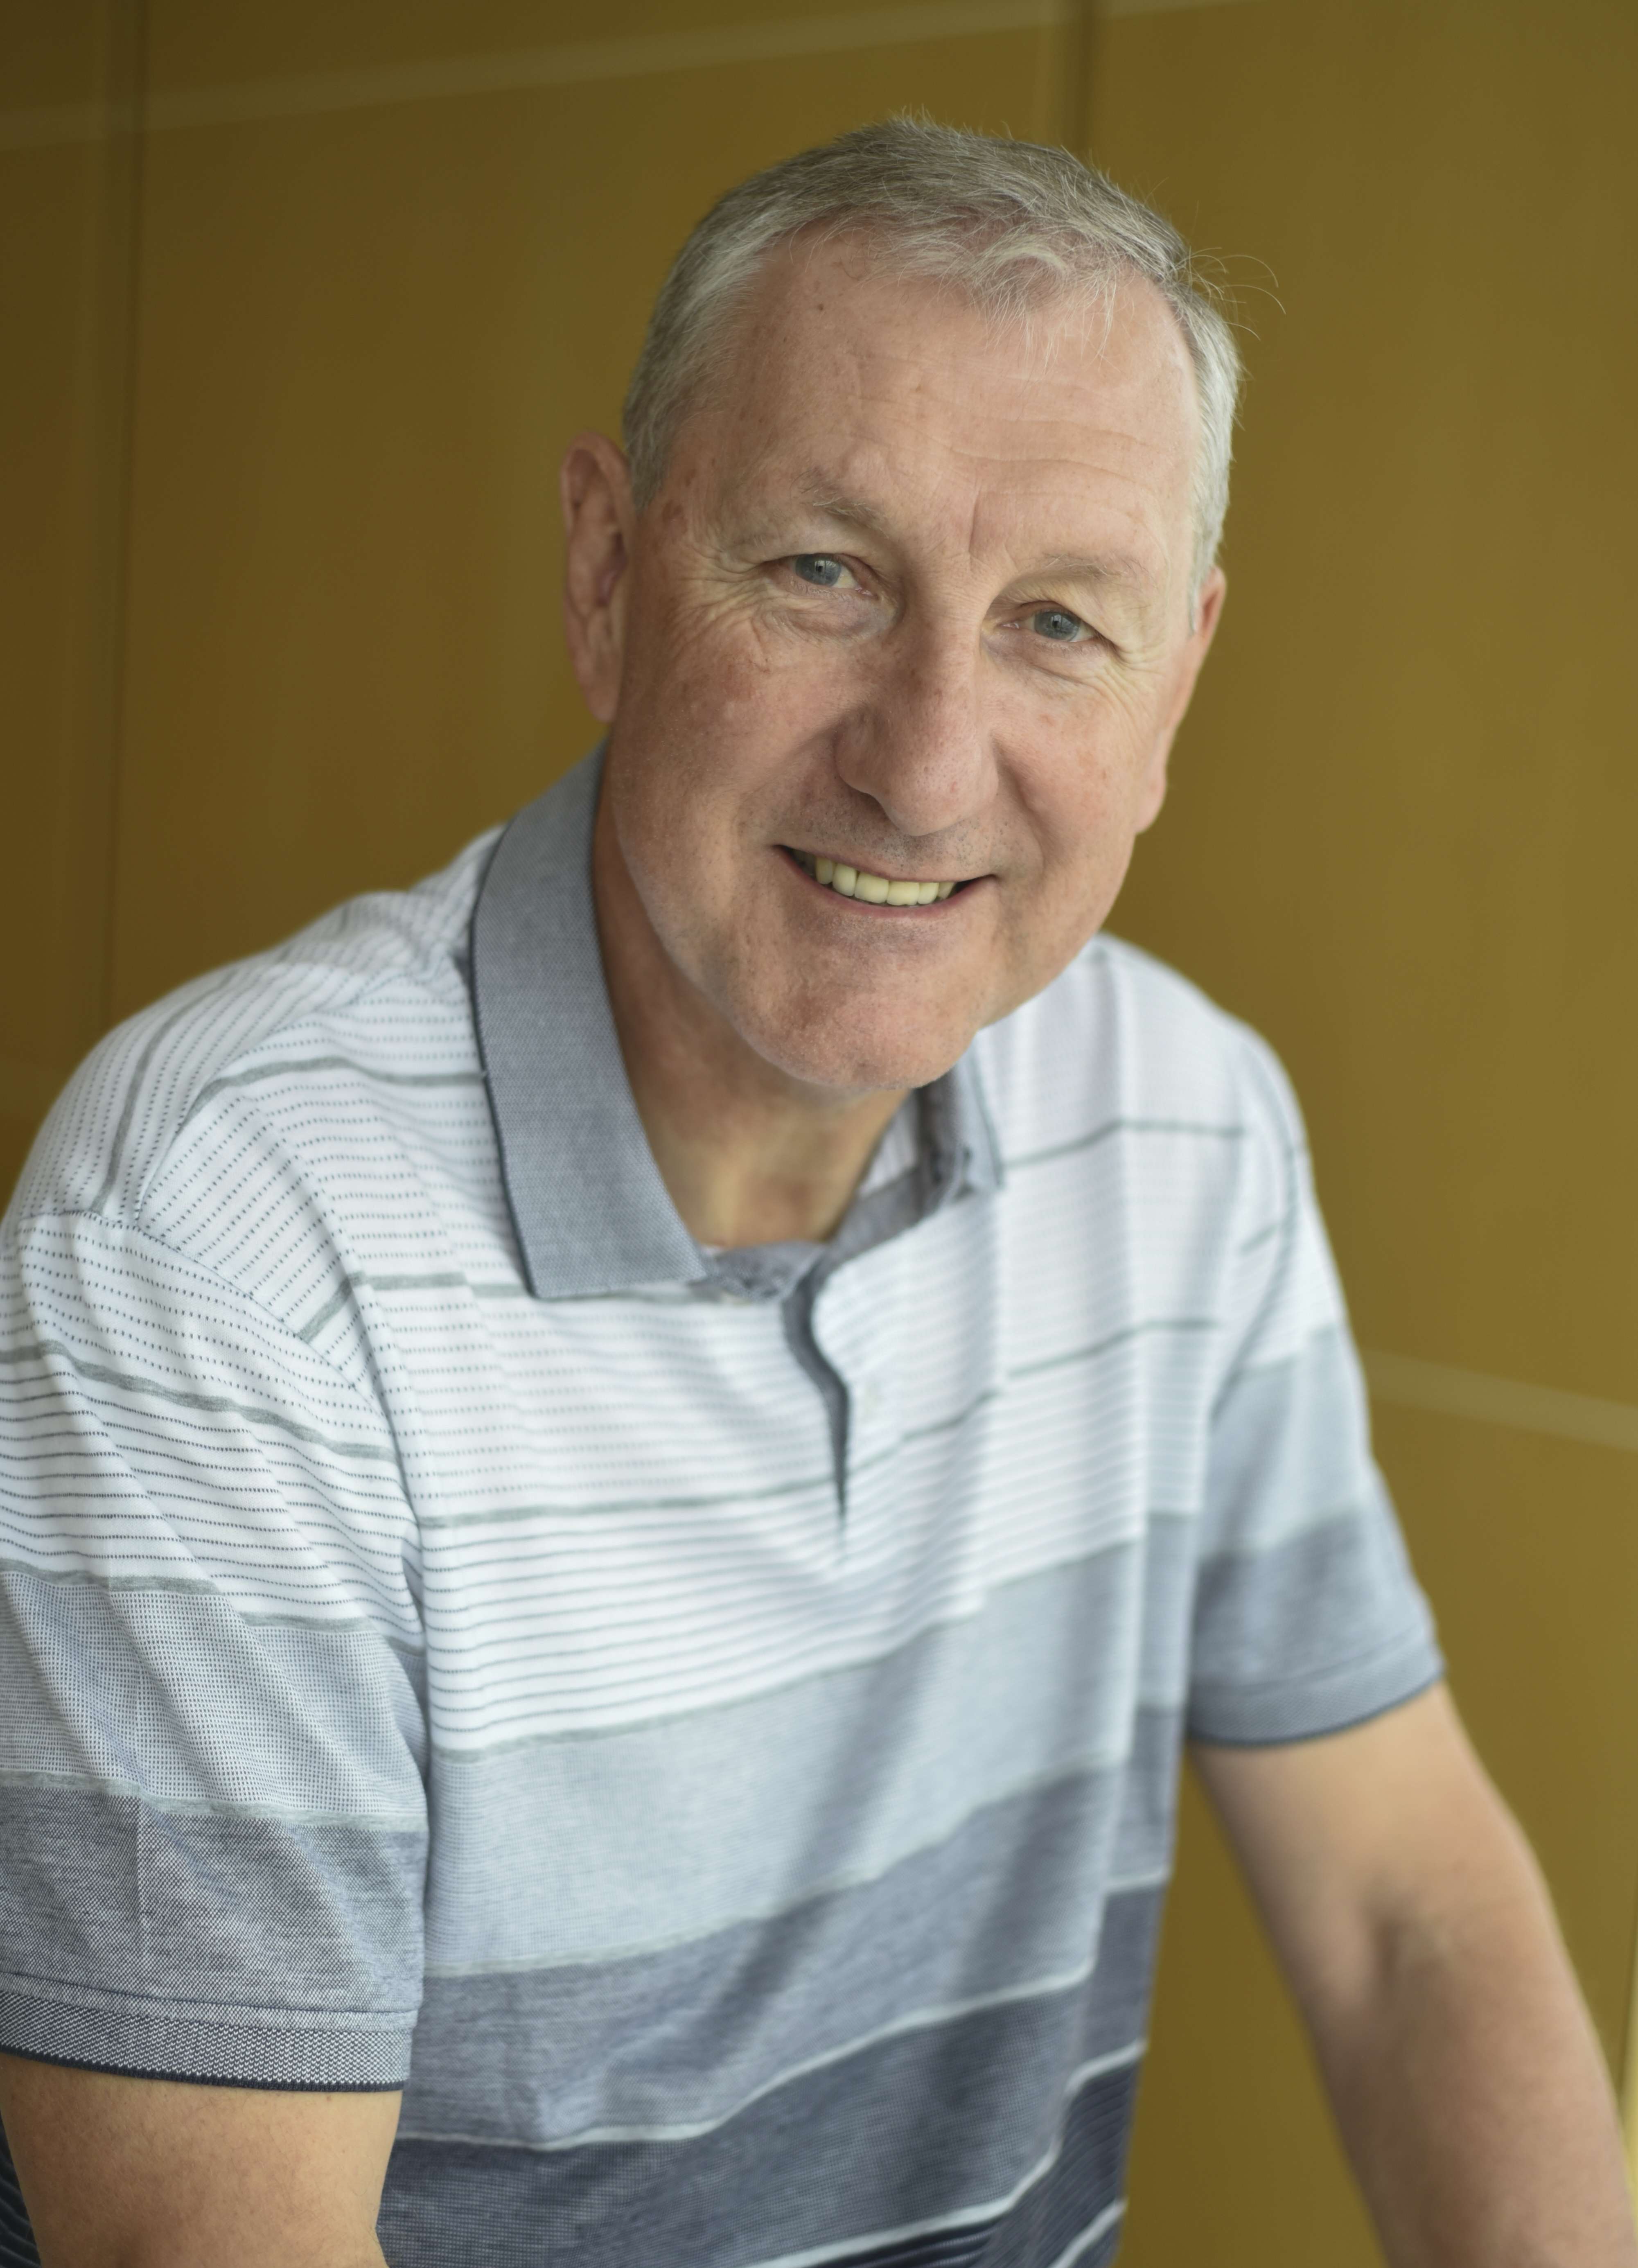 I’ve got a good face for radio, says Terry Butcher. Picture: Chen Xiaomei